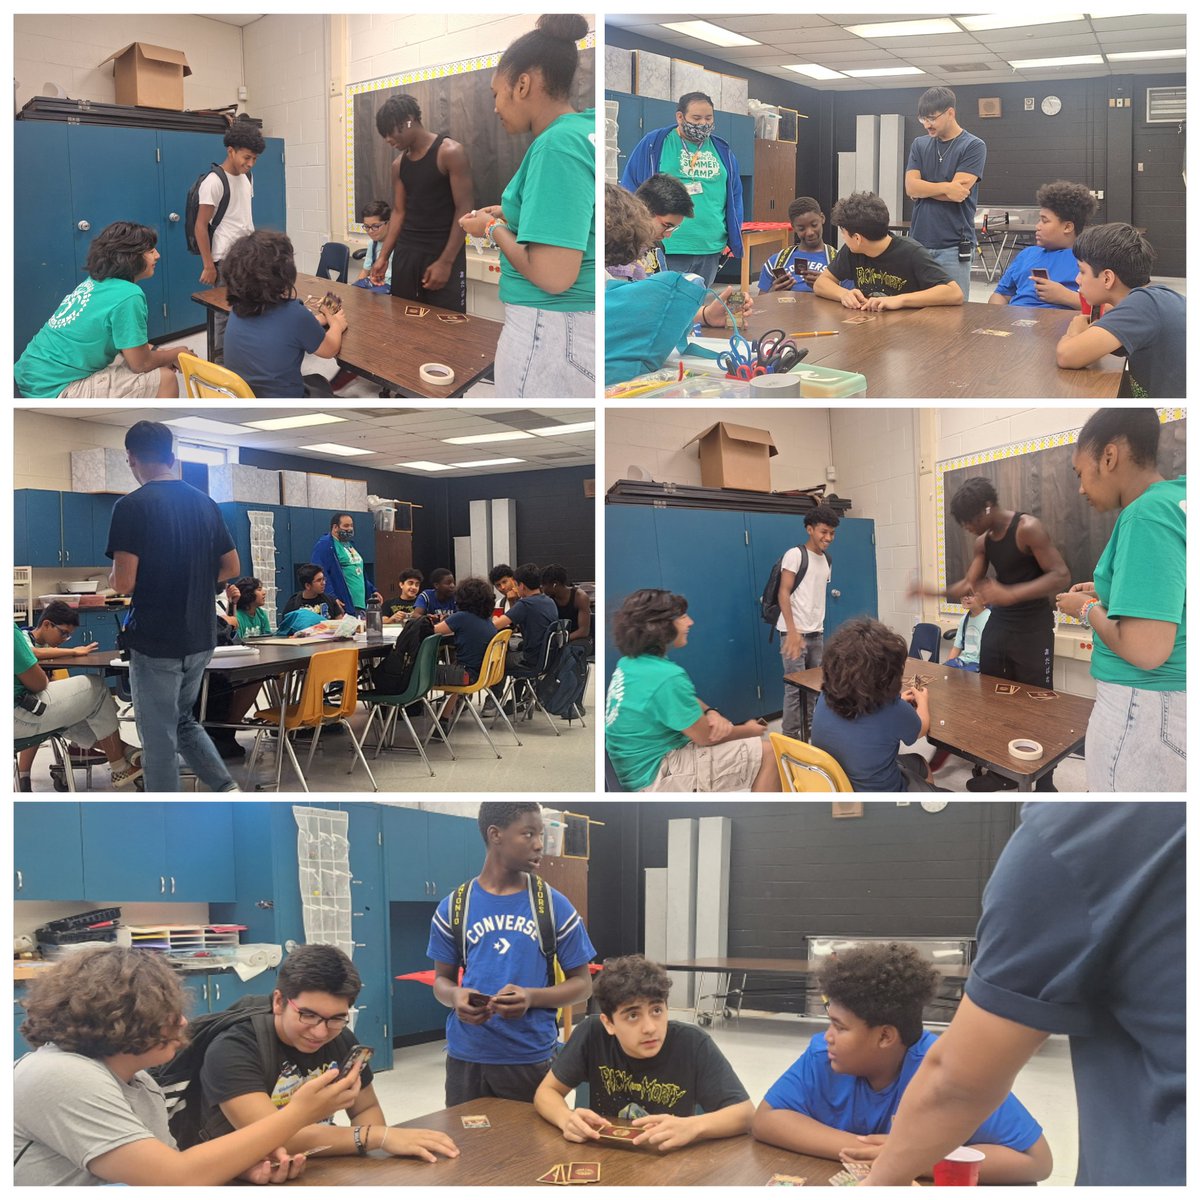 Students engaged in MindWorks PBL as some make mazes,they had ideas from rescues, super heroes to an IRS office 😆  Others played a cardgame of building the best Carnival by preplanning & strategizing
@NISDLearningTre 
@NISDRoss 
@NISD_Rayburn 
@NISDRudder 
@NISDJones 
@LazoNISD